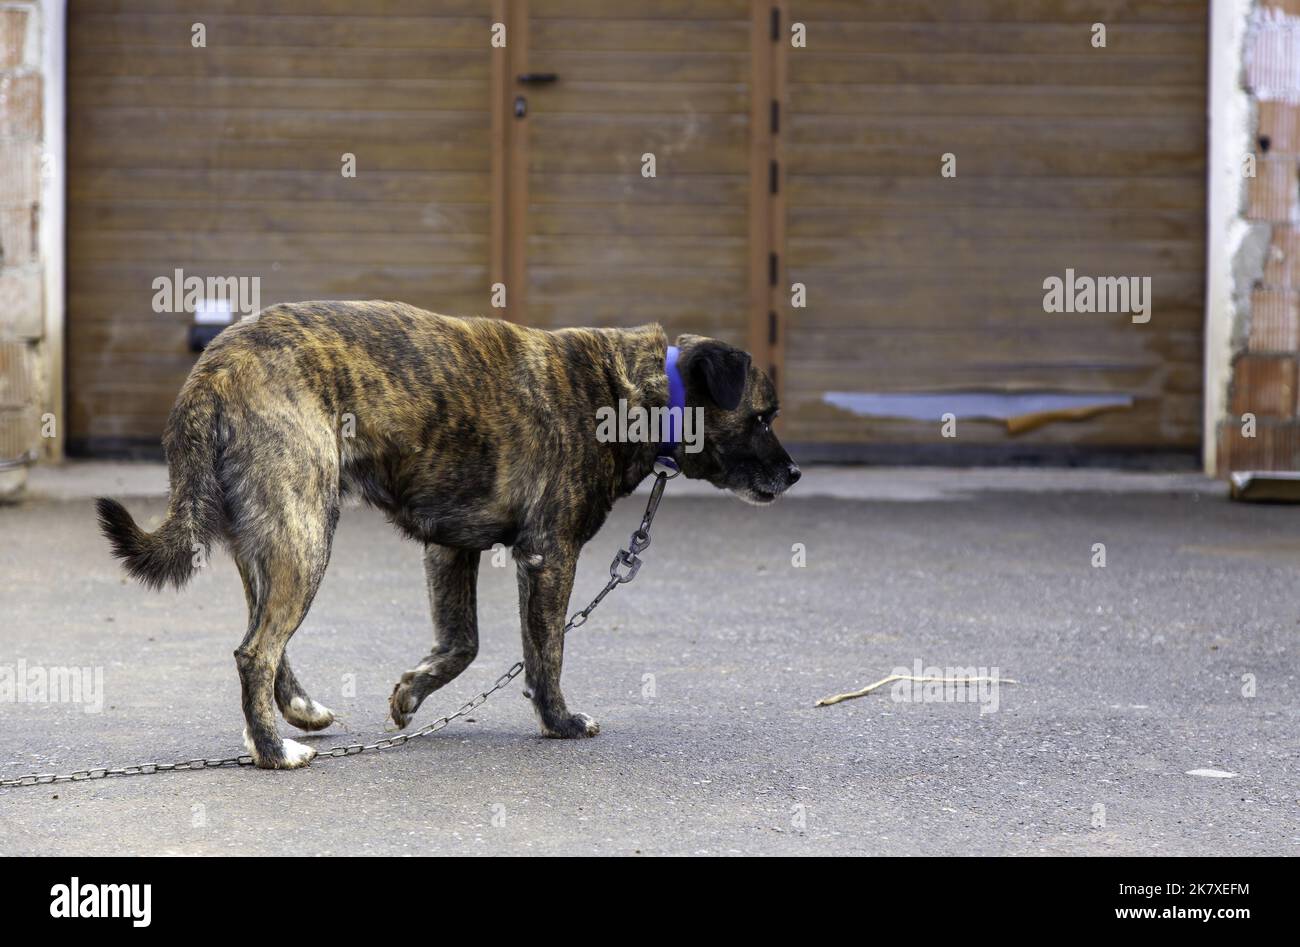 Detail of chained animal suffering, animal abuse Stock Photo